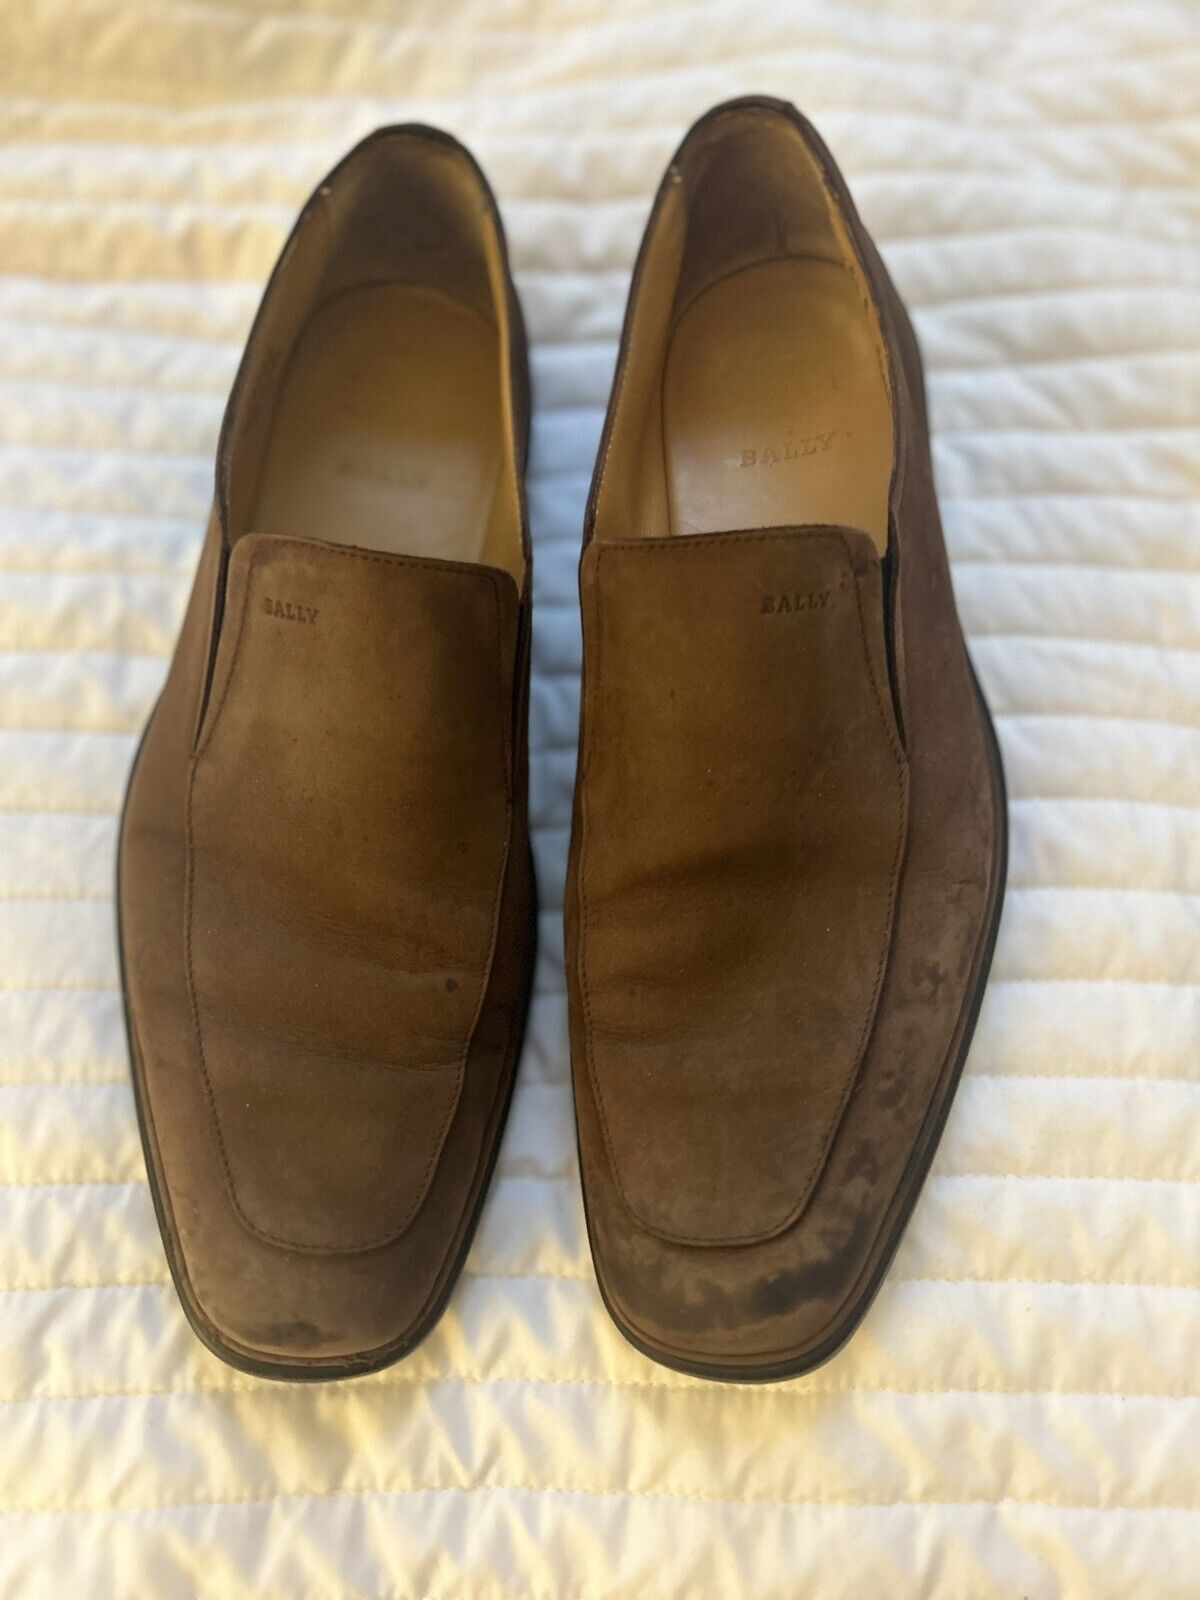 Bally Men\'s Slip-On Loafers - Brown Suede, Size 10.5E Nearly New Originally $400